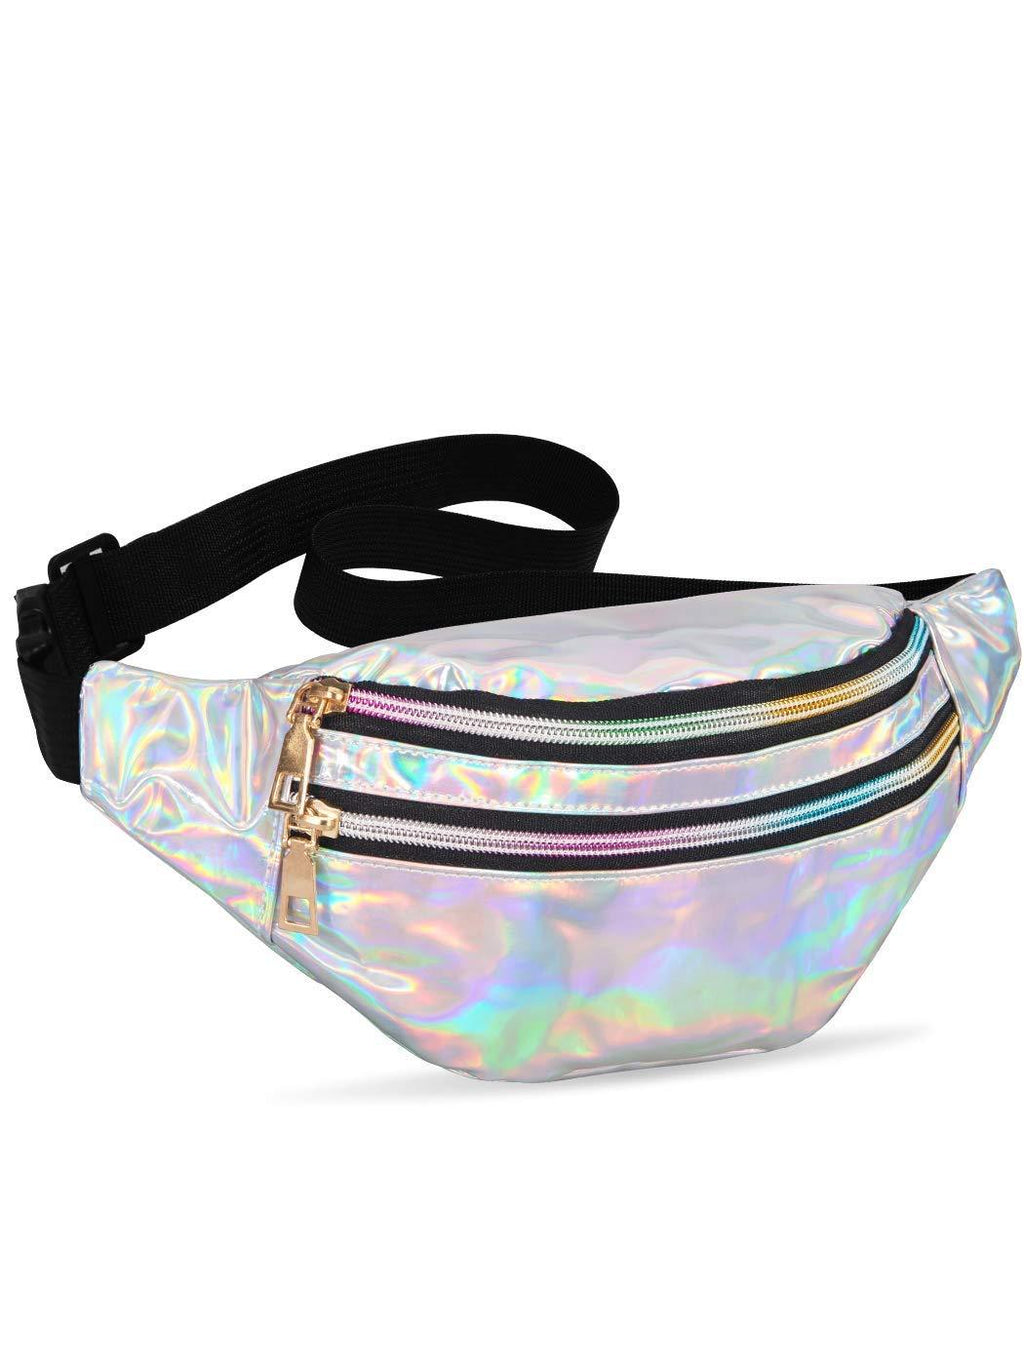 LIVACASA Holographic Fanny Packs for Women Cute Black Waist Packs Shiny Waist Bum Bag Waterproof for Travel Party Festival Running Hiking All Silver 12.2 ''x 9'' x5''